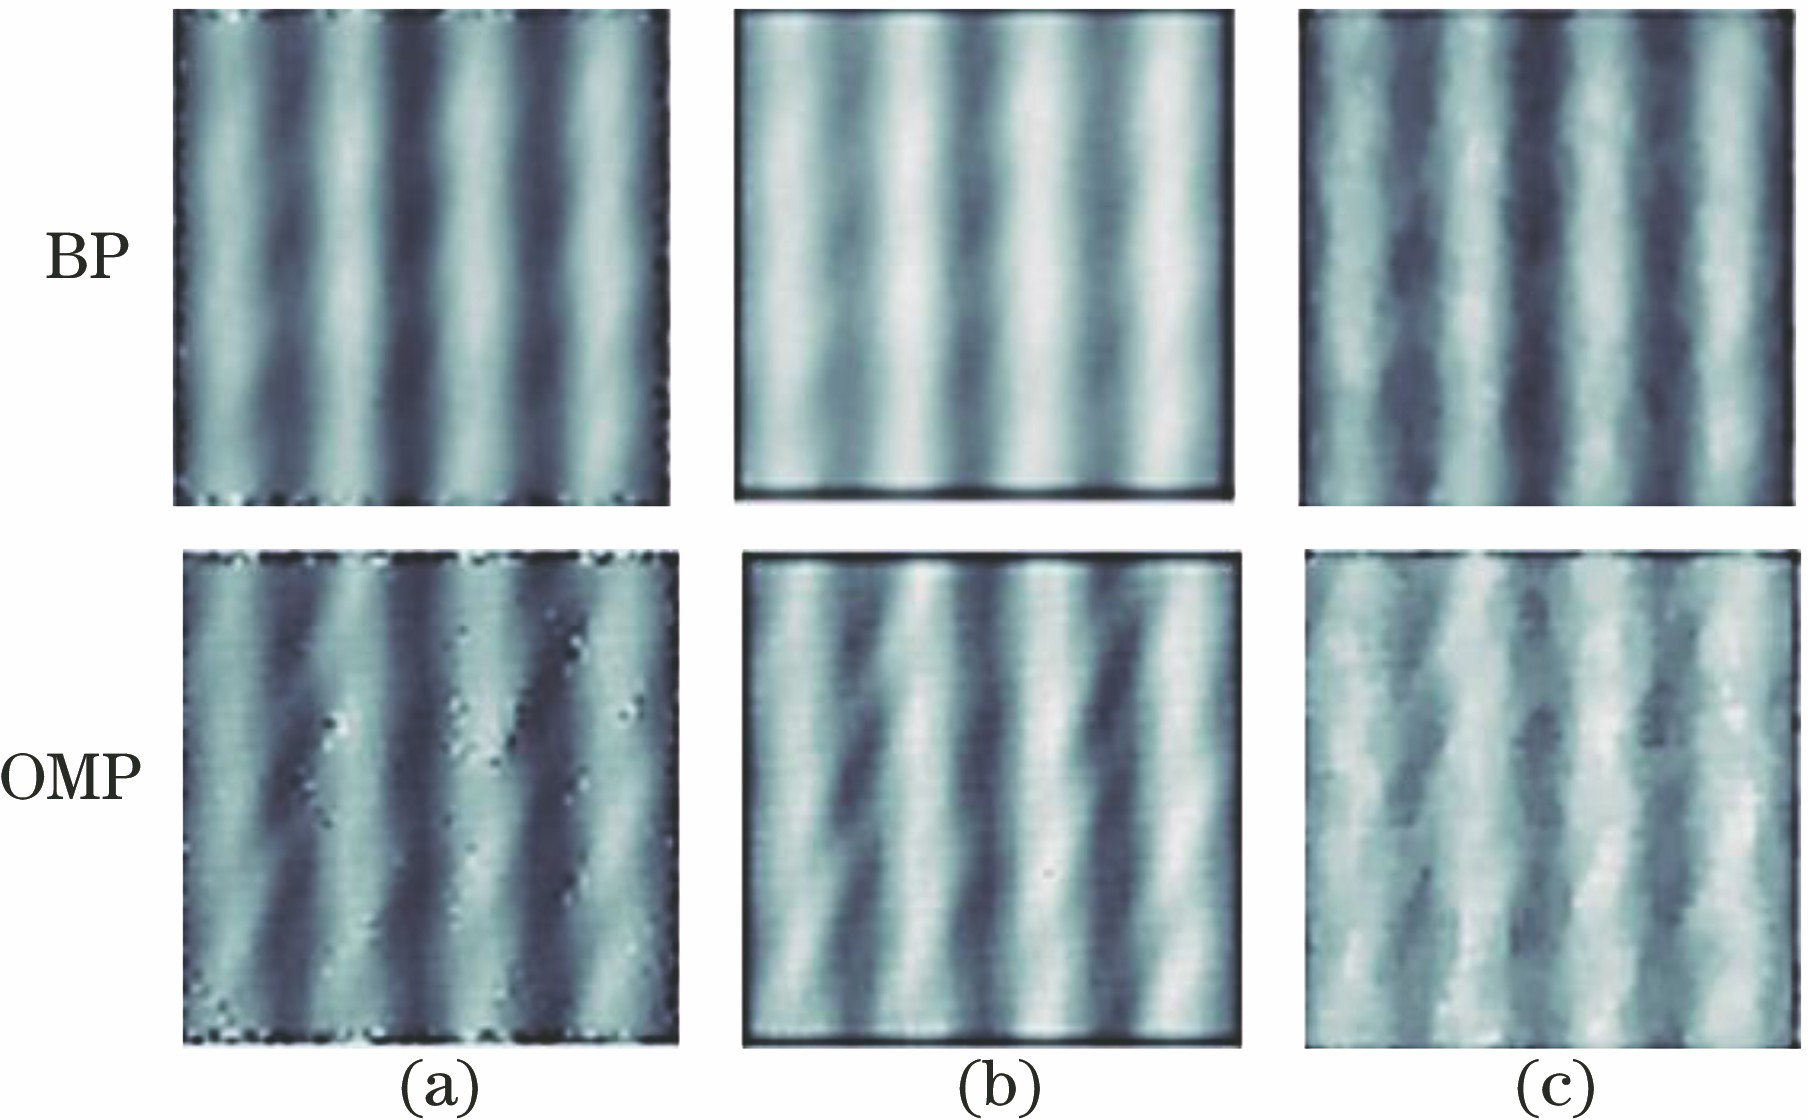 Reconstructed and filtering-processed results based on steady single-photon counting mode under single wavelength. (a) Wiener filtering; (b) mean filtering; (c) median filtering